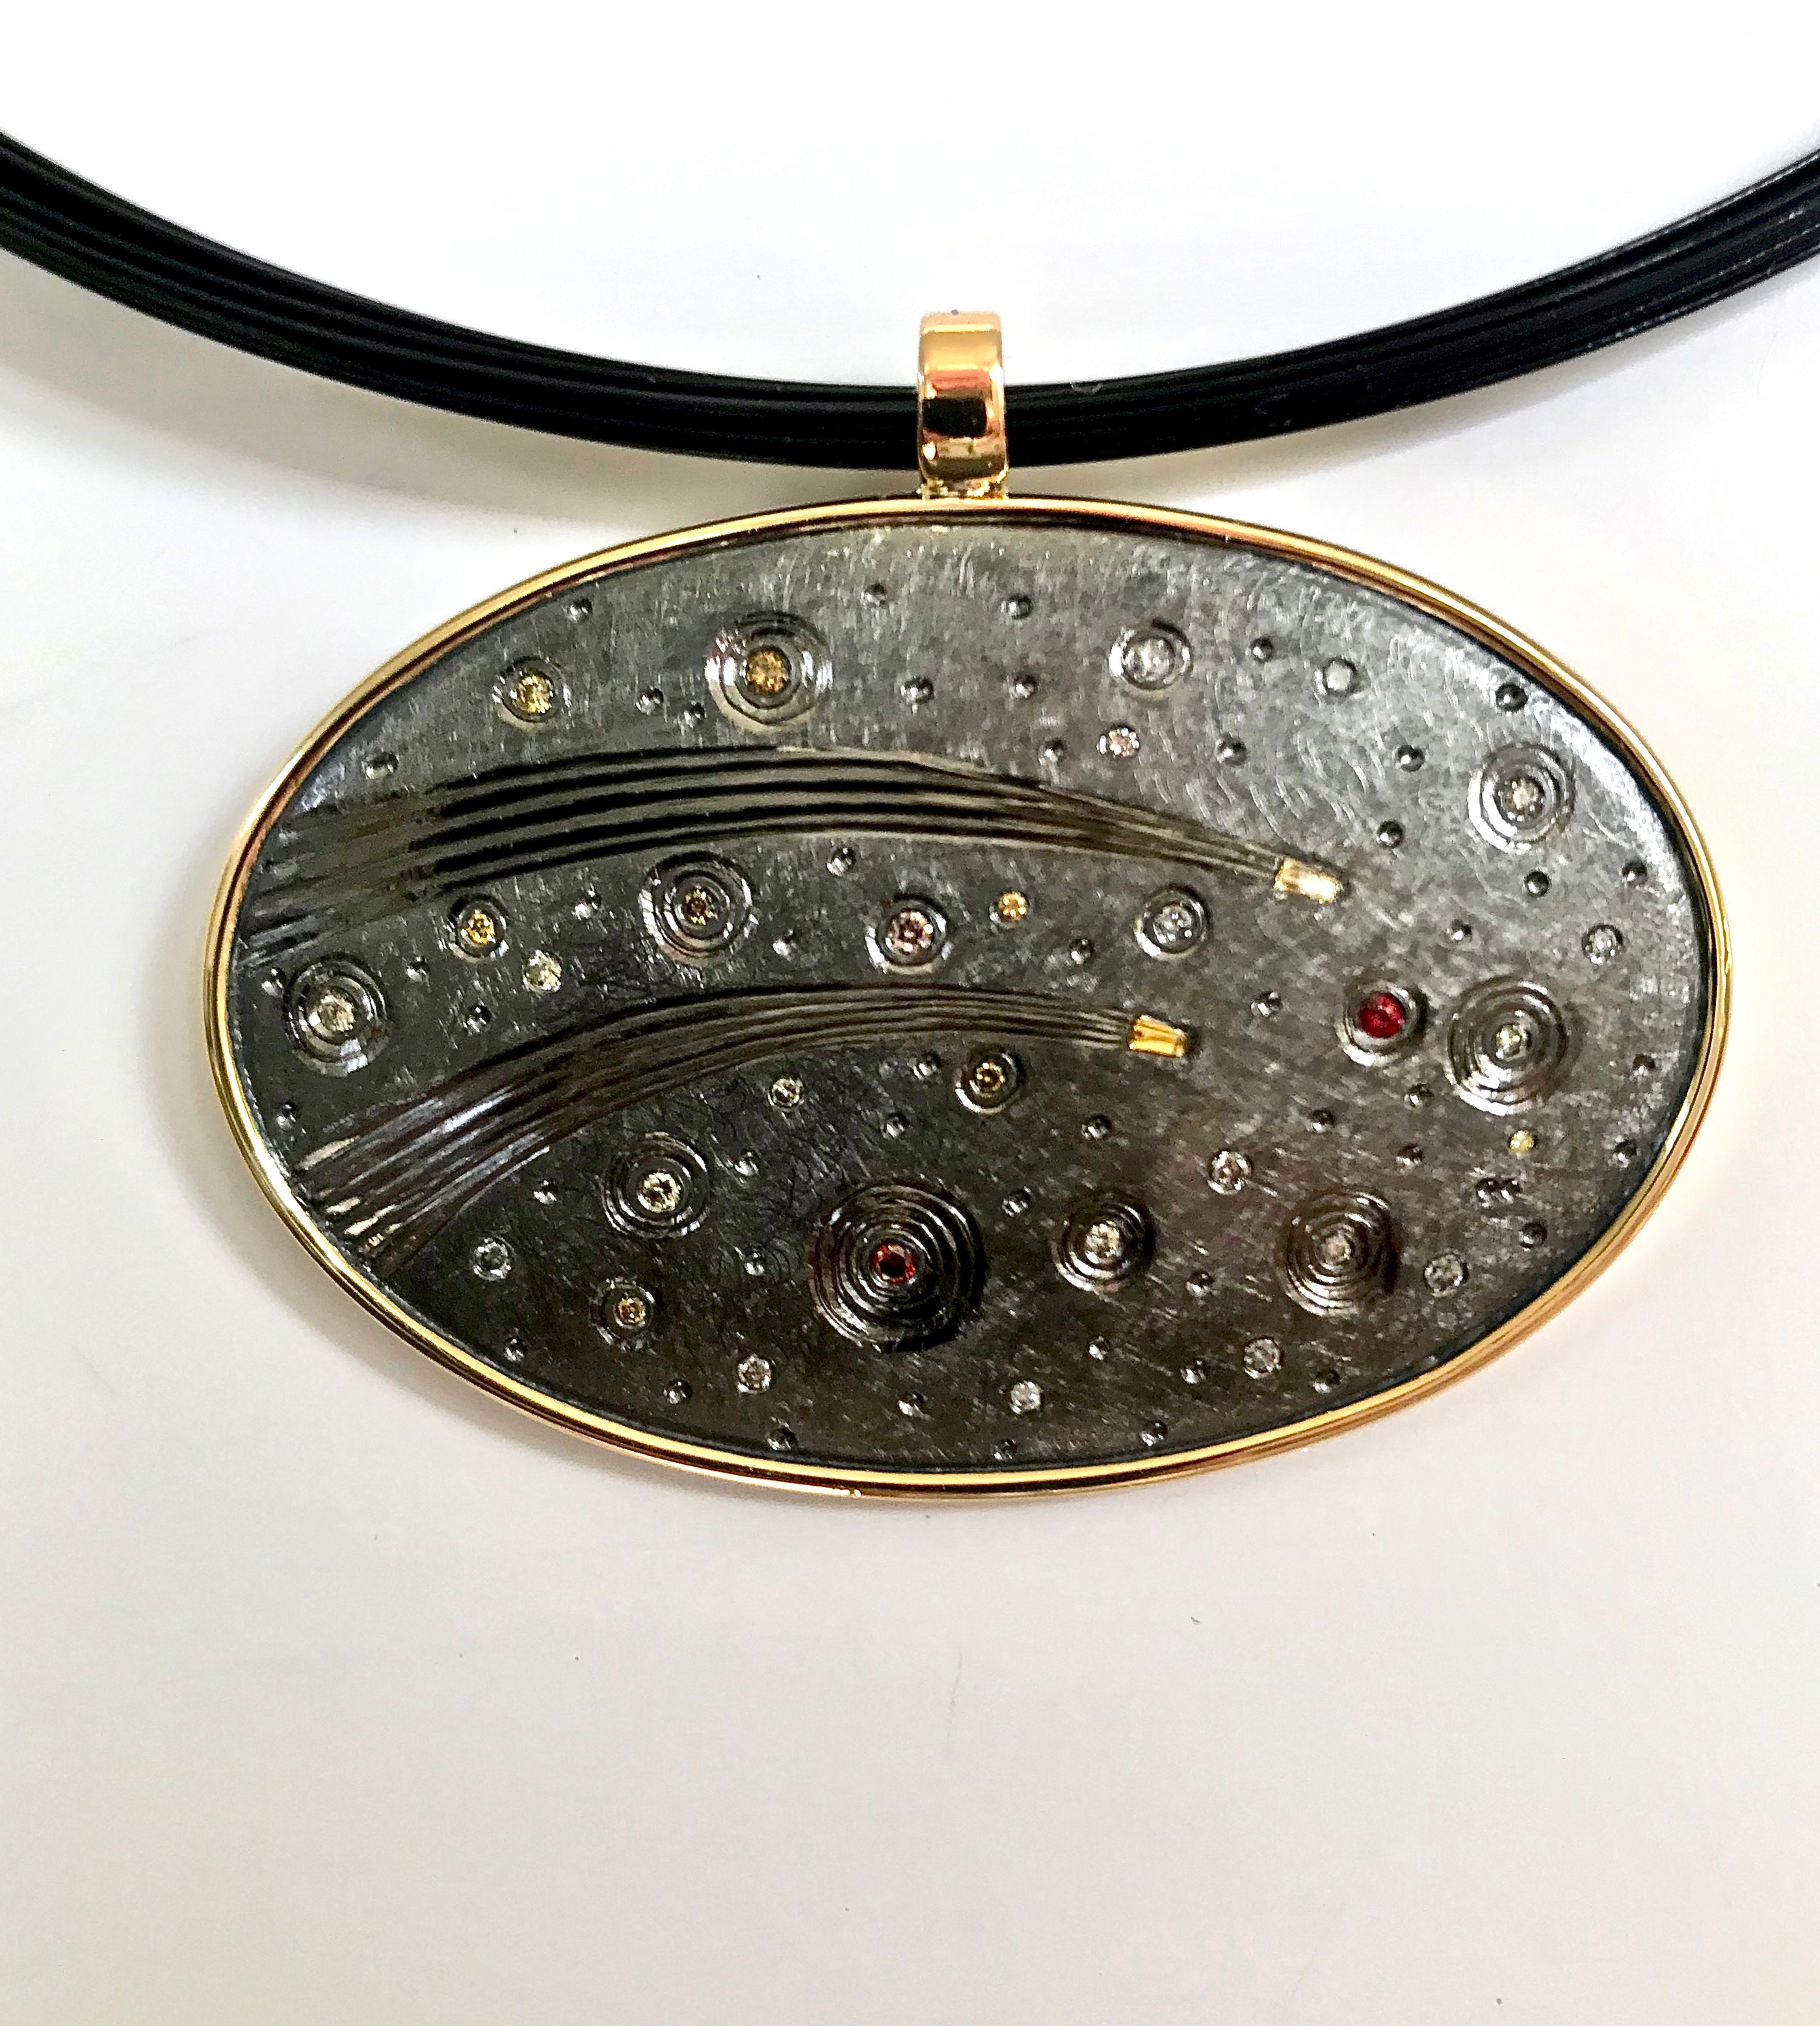 <a href="/node/289">Two Comets. Recent Commission 50 th wedding anniversary / pendent drop 18ct gold / Silver / hand engraved / set with various coloured diamonds /finished in black Rhodium plate</a>